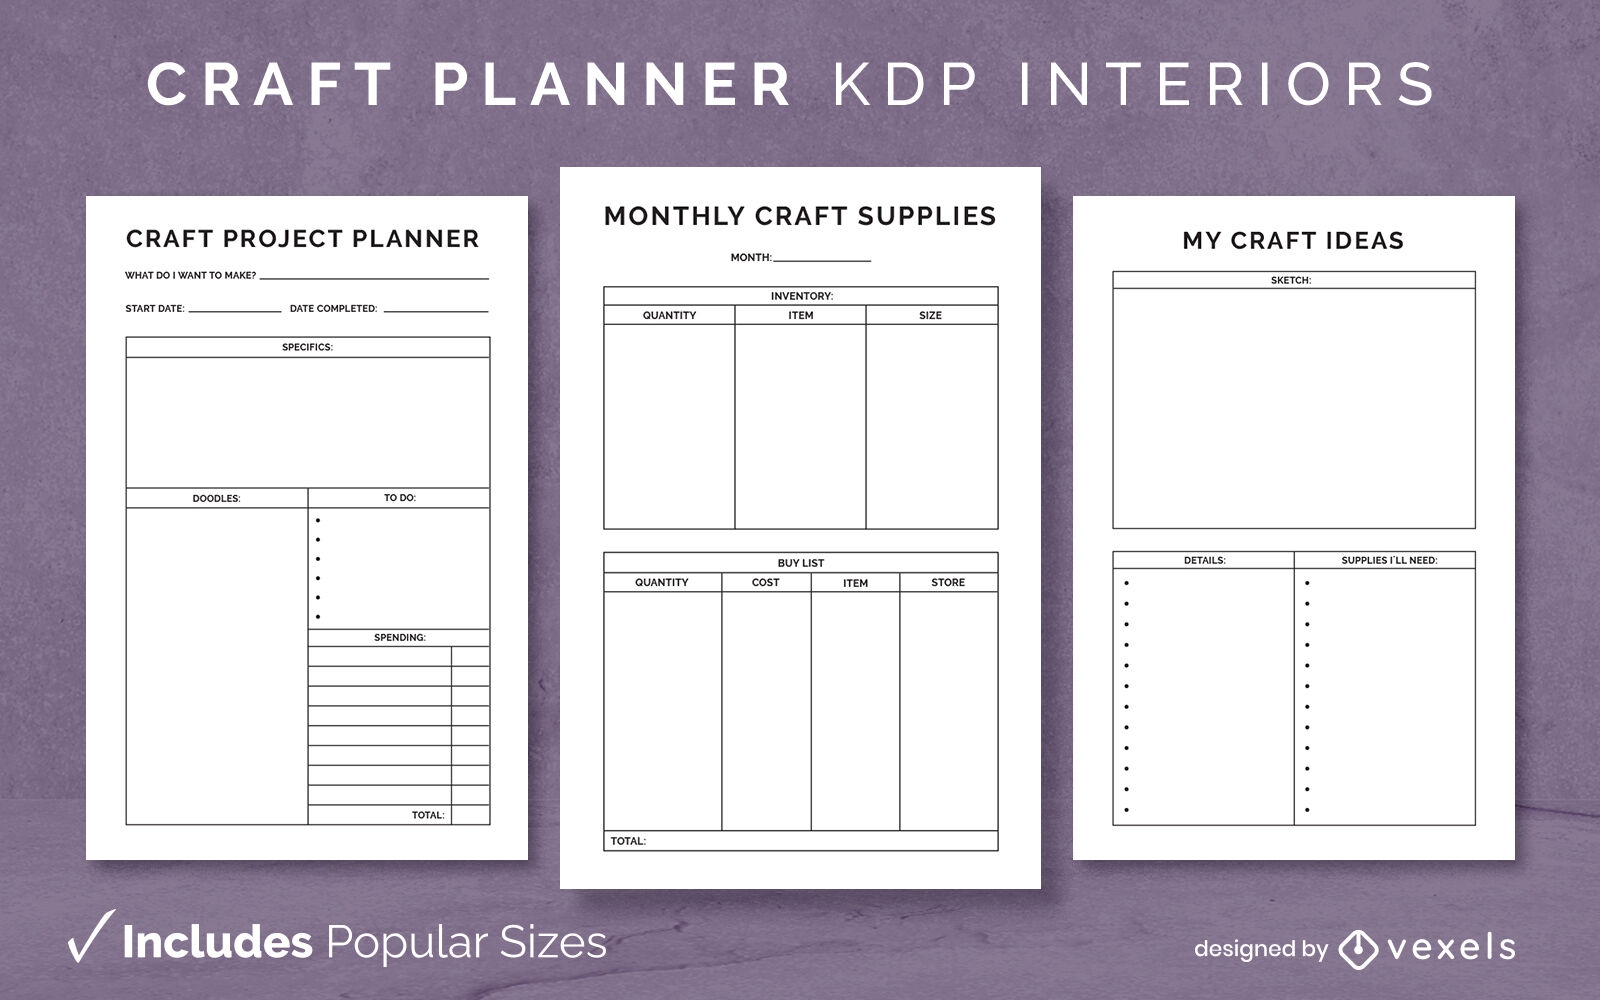 Craft projects planner Diary Design Template KDP